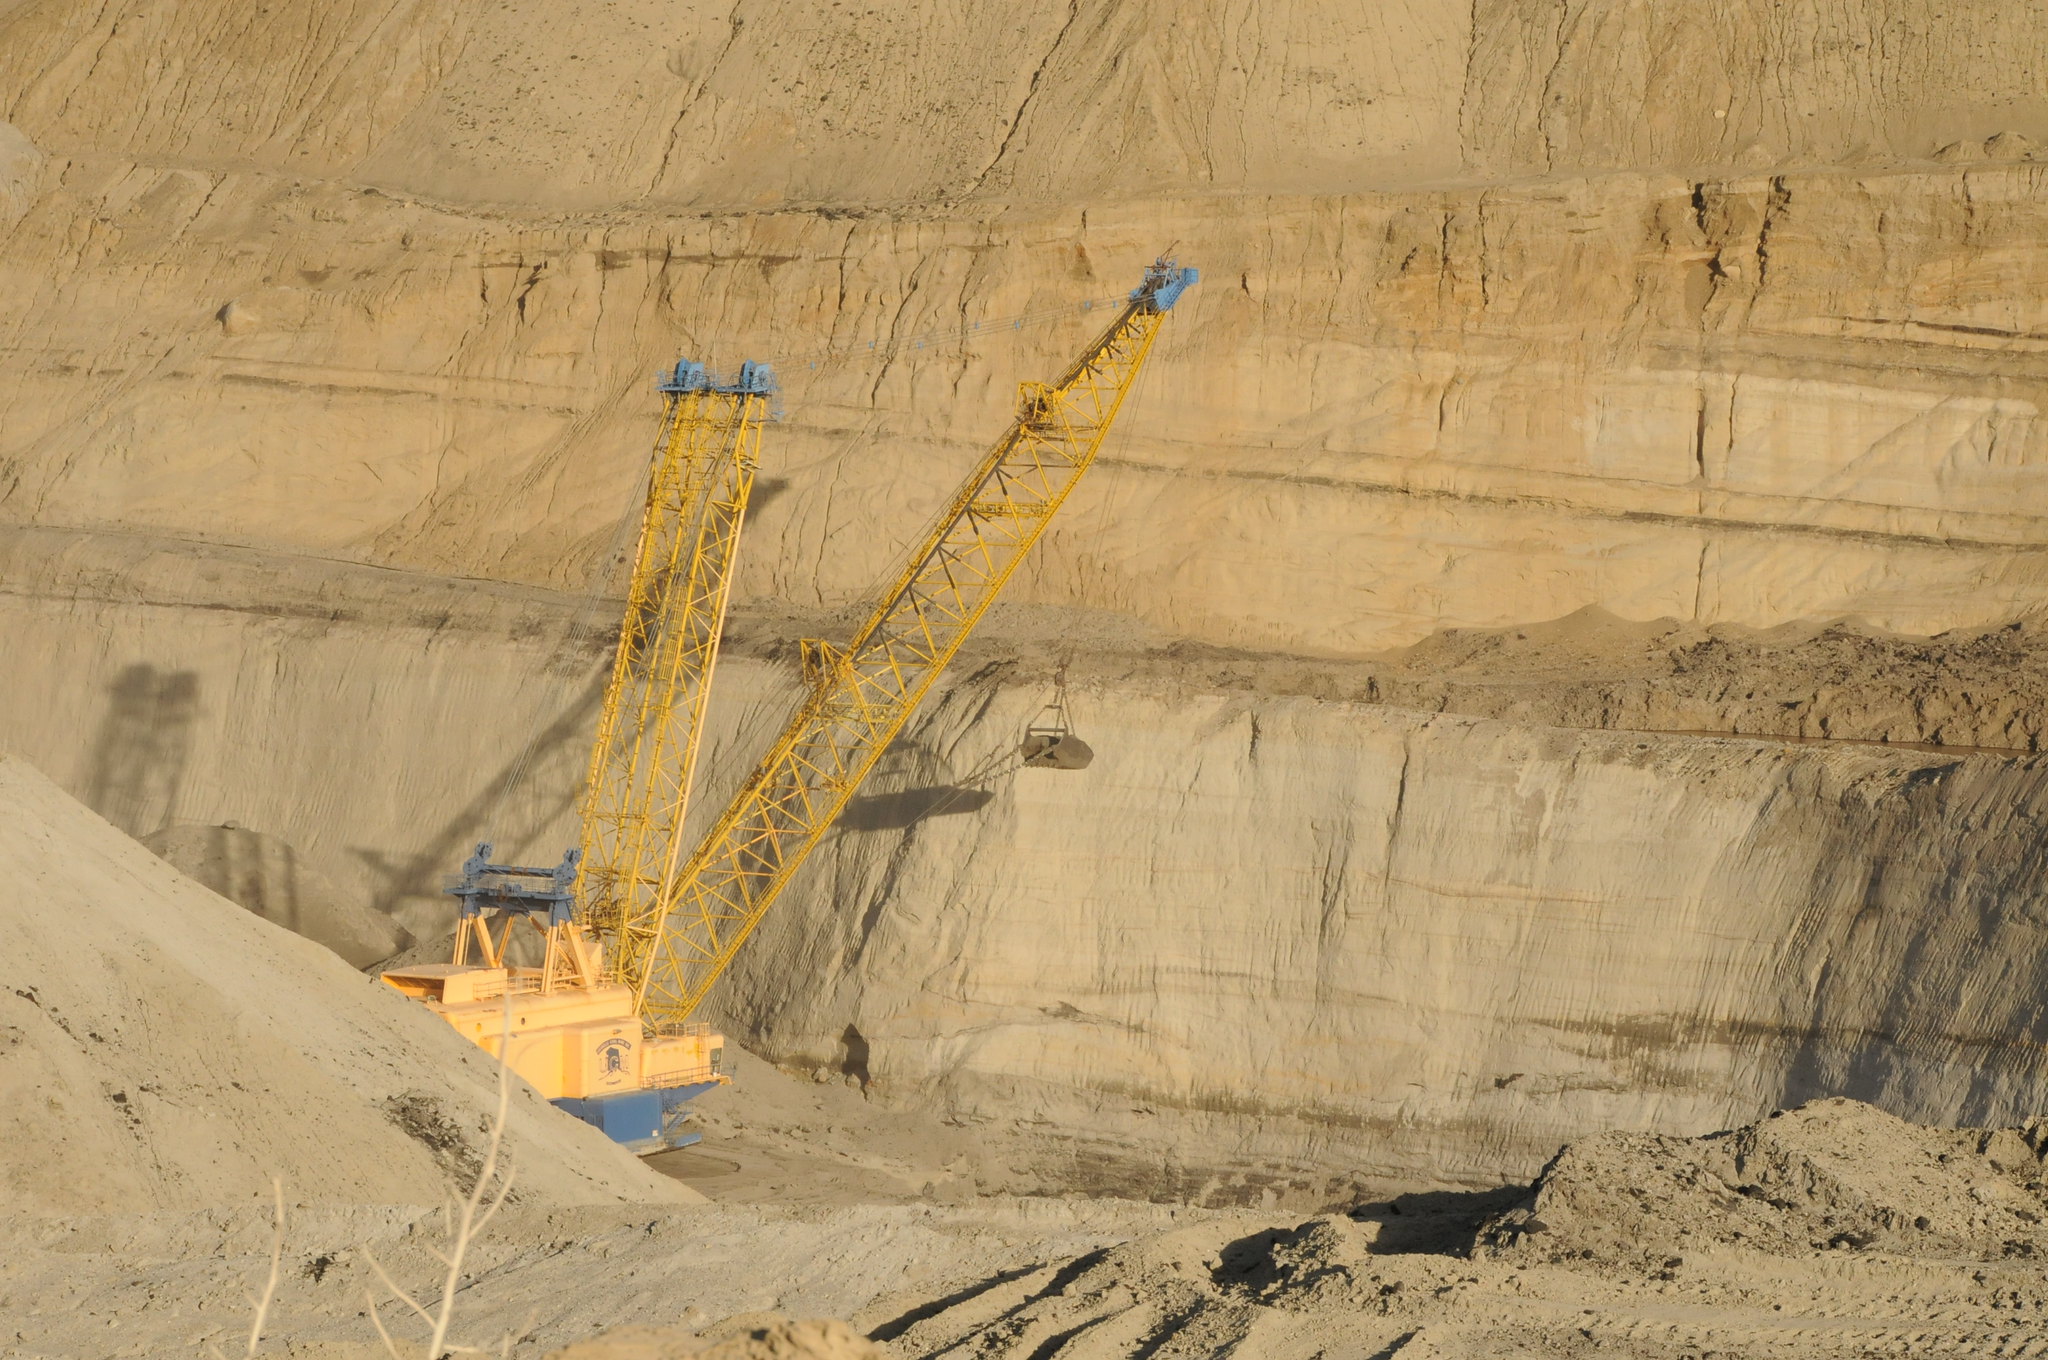 Photograph of a dragline in the Usibelli Coal Mine, Healy, Alaska. The photo shows a machine that looks similar to a crane with a bucket suspended off the end that is used to dig coal.